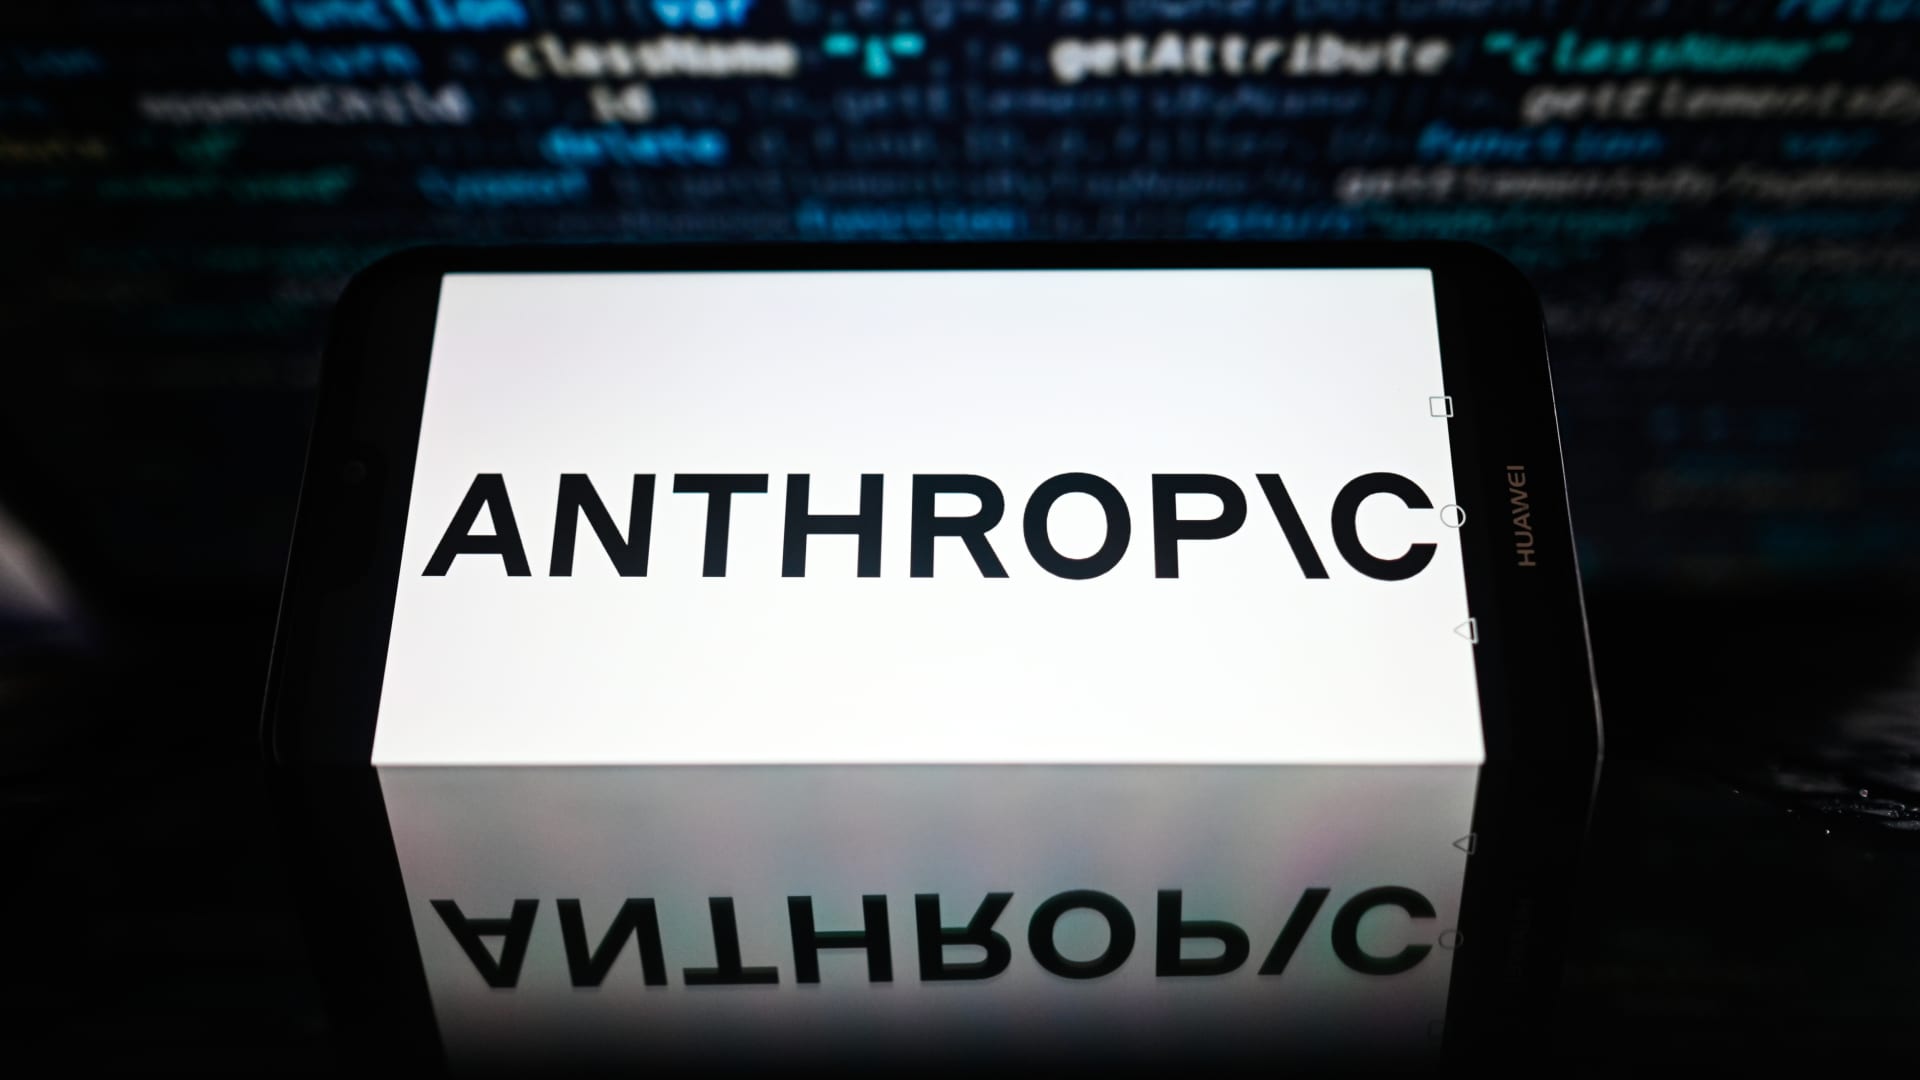 Anthropic, backed by Amazon and Google, debuts its most powerful chatbot yet